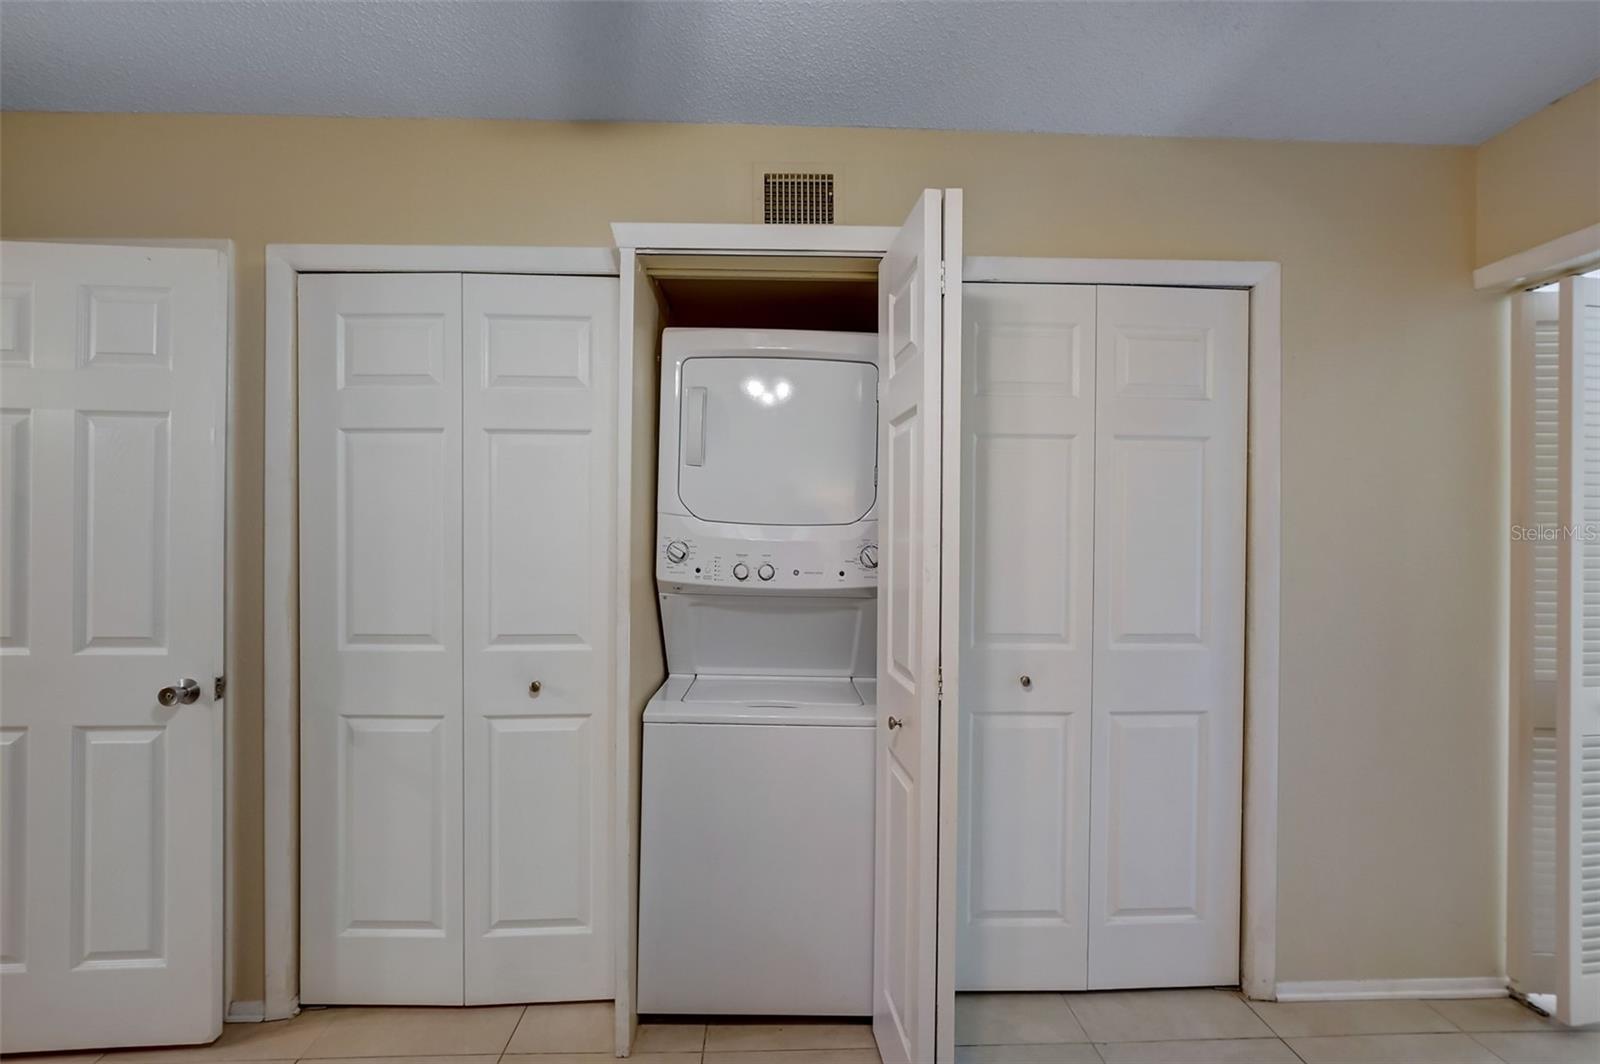 Included washer/dryer and closets